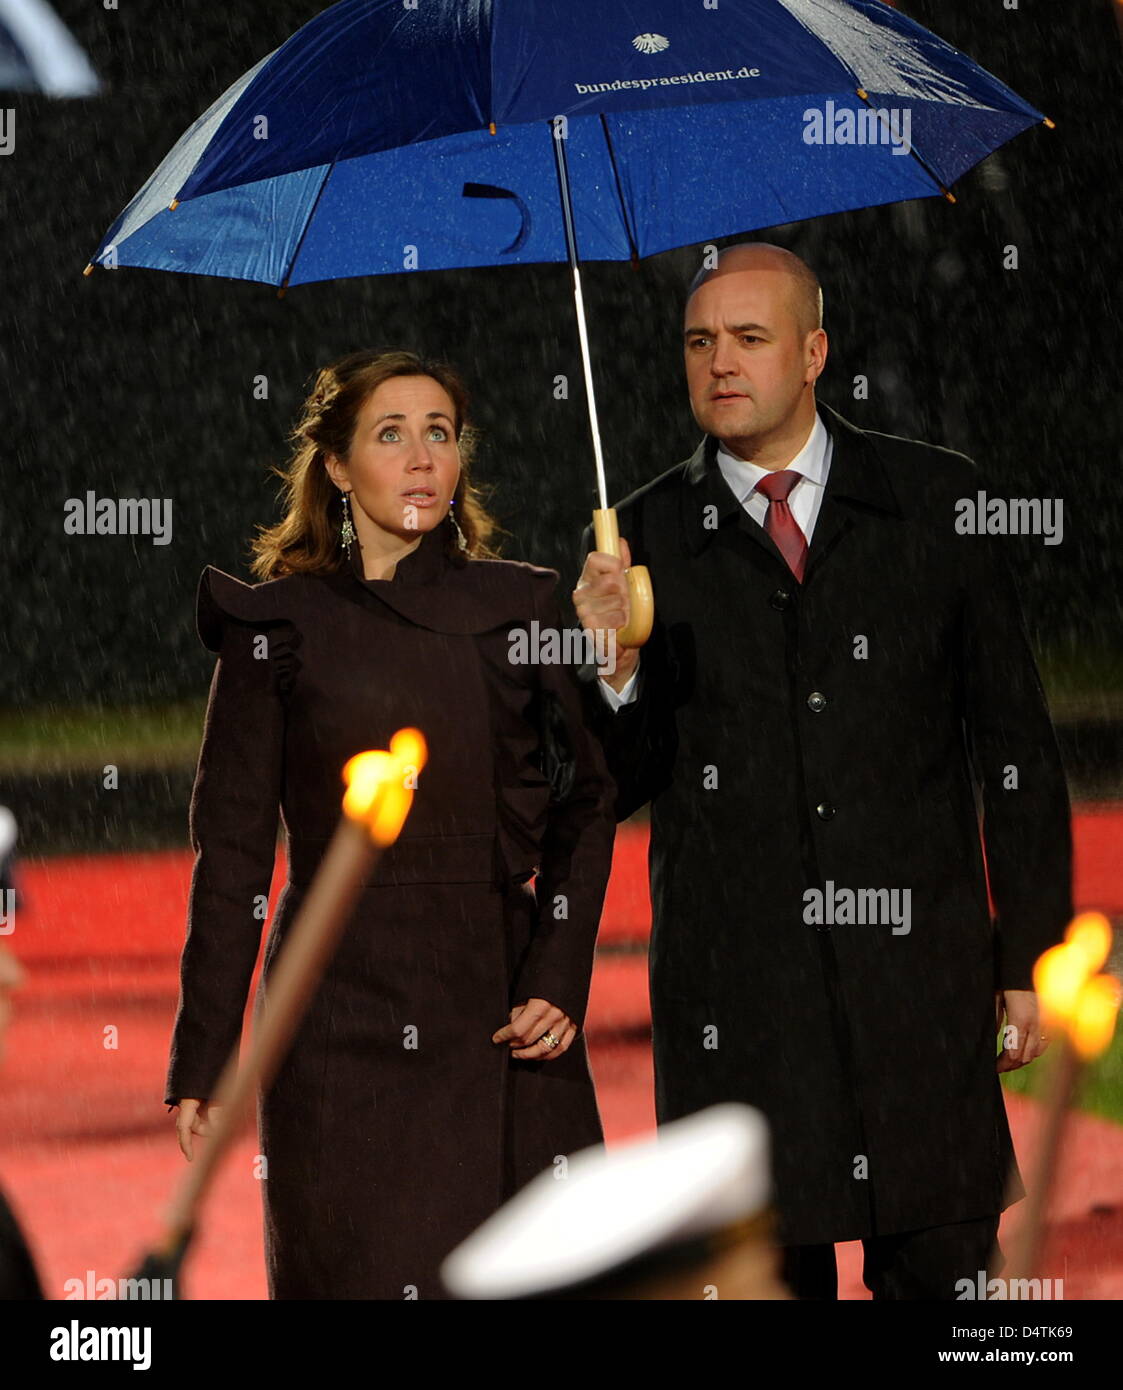 Sweden?s Prime Minister Fredrik Reinfeldt (R) and his wife Filippa Reinfeldt arrive for a banquet at Bellevue Palace in Berlin, Germany, 09 November 2009 during celebrations marking the 20th anniversary of the fall of the Berlin Wall. Photo: Tim Brakemeier Stock Photo